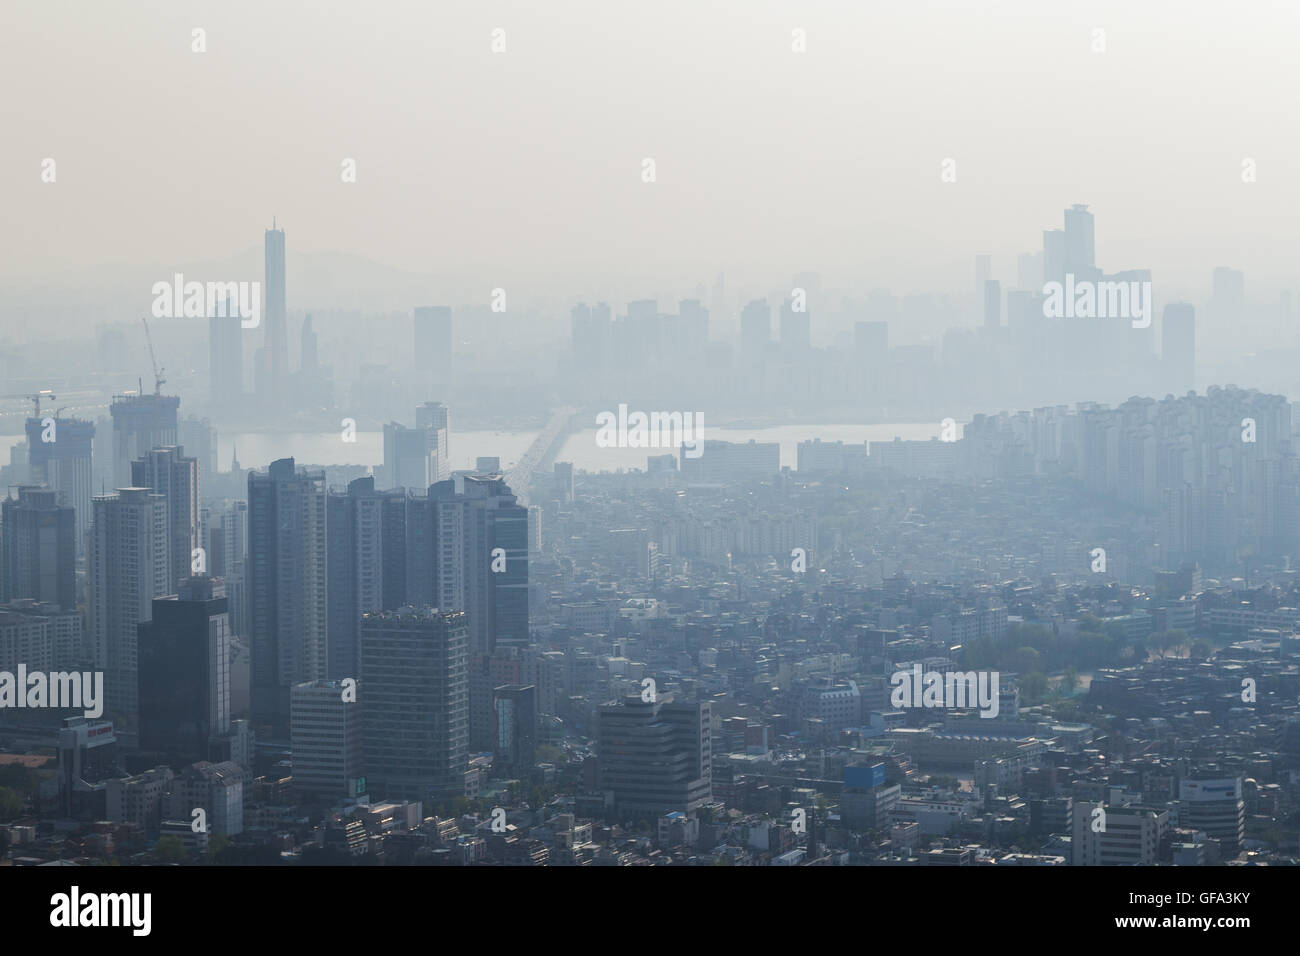 View of downtown in Seoul, South Korea, with serious air pollution. Stock Photo